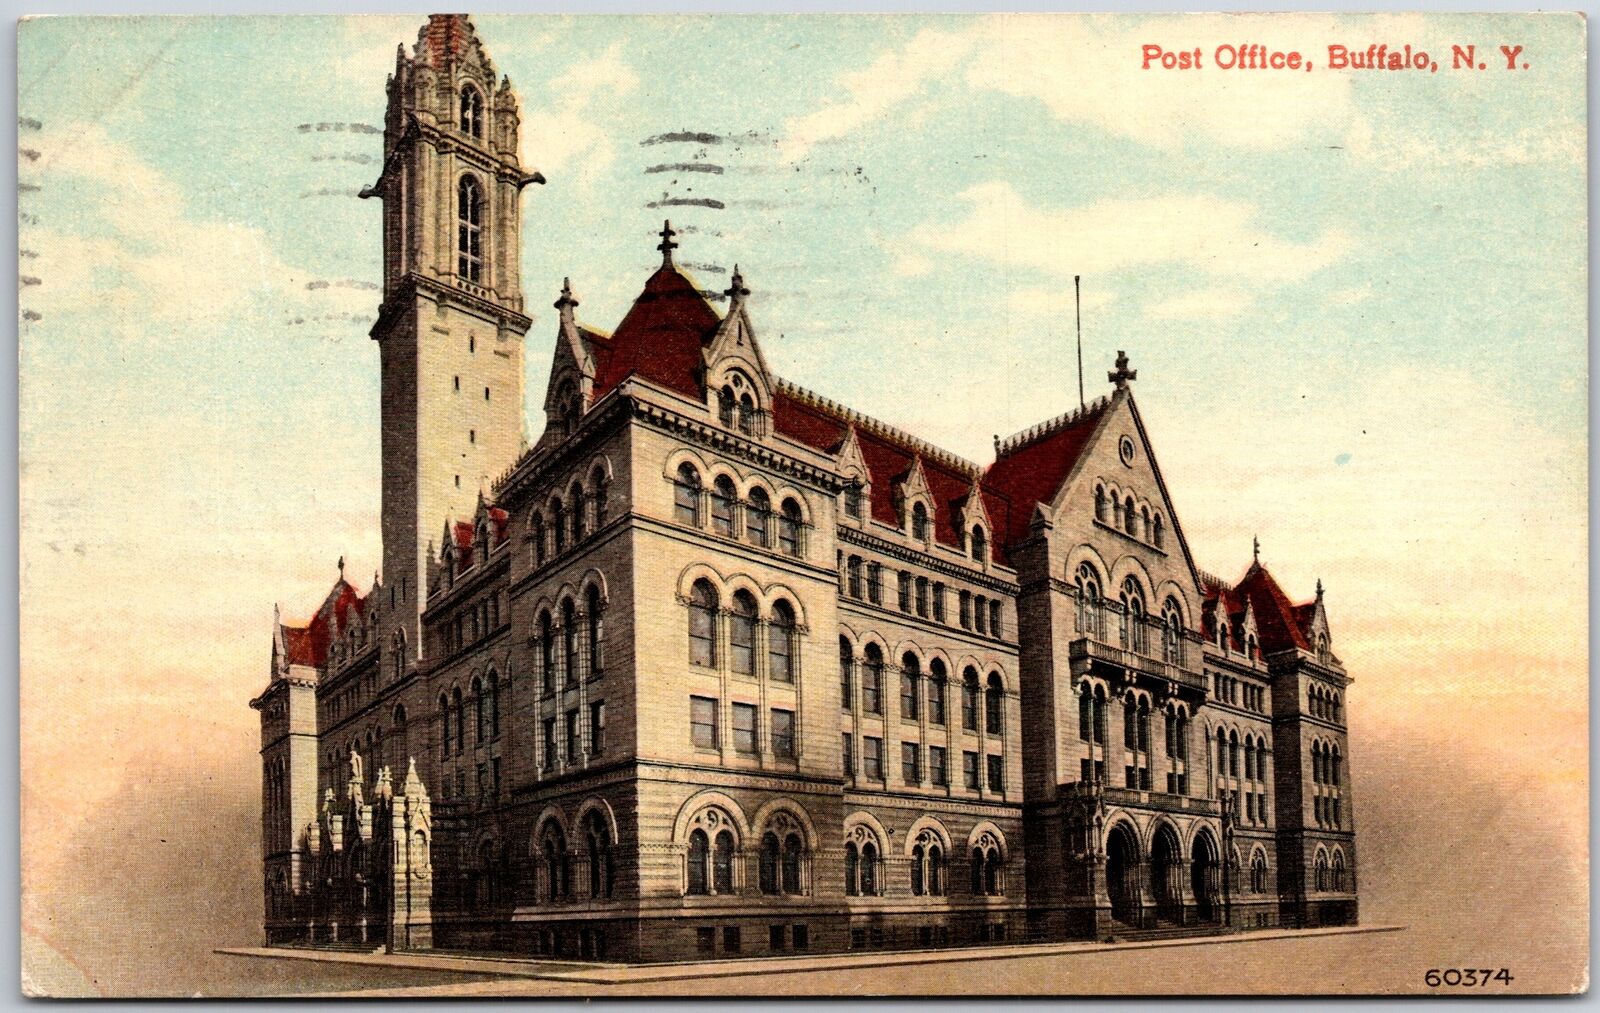 New York, 1913 Historic Post Office Tower, Government Building, Vintage Postcard